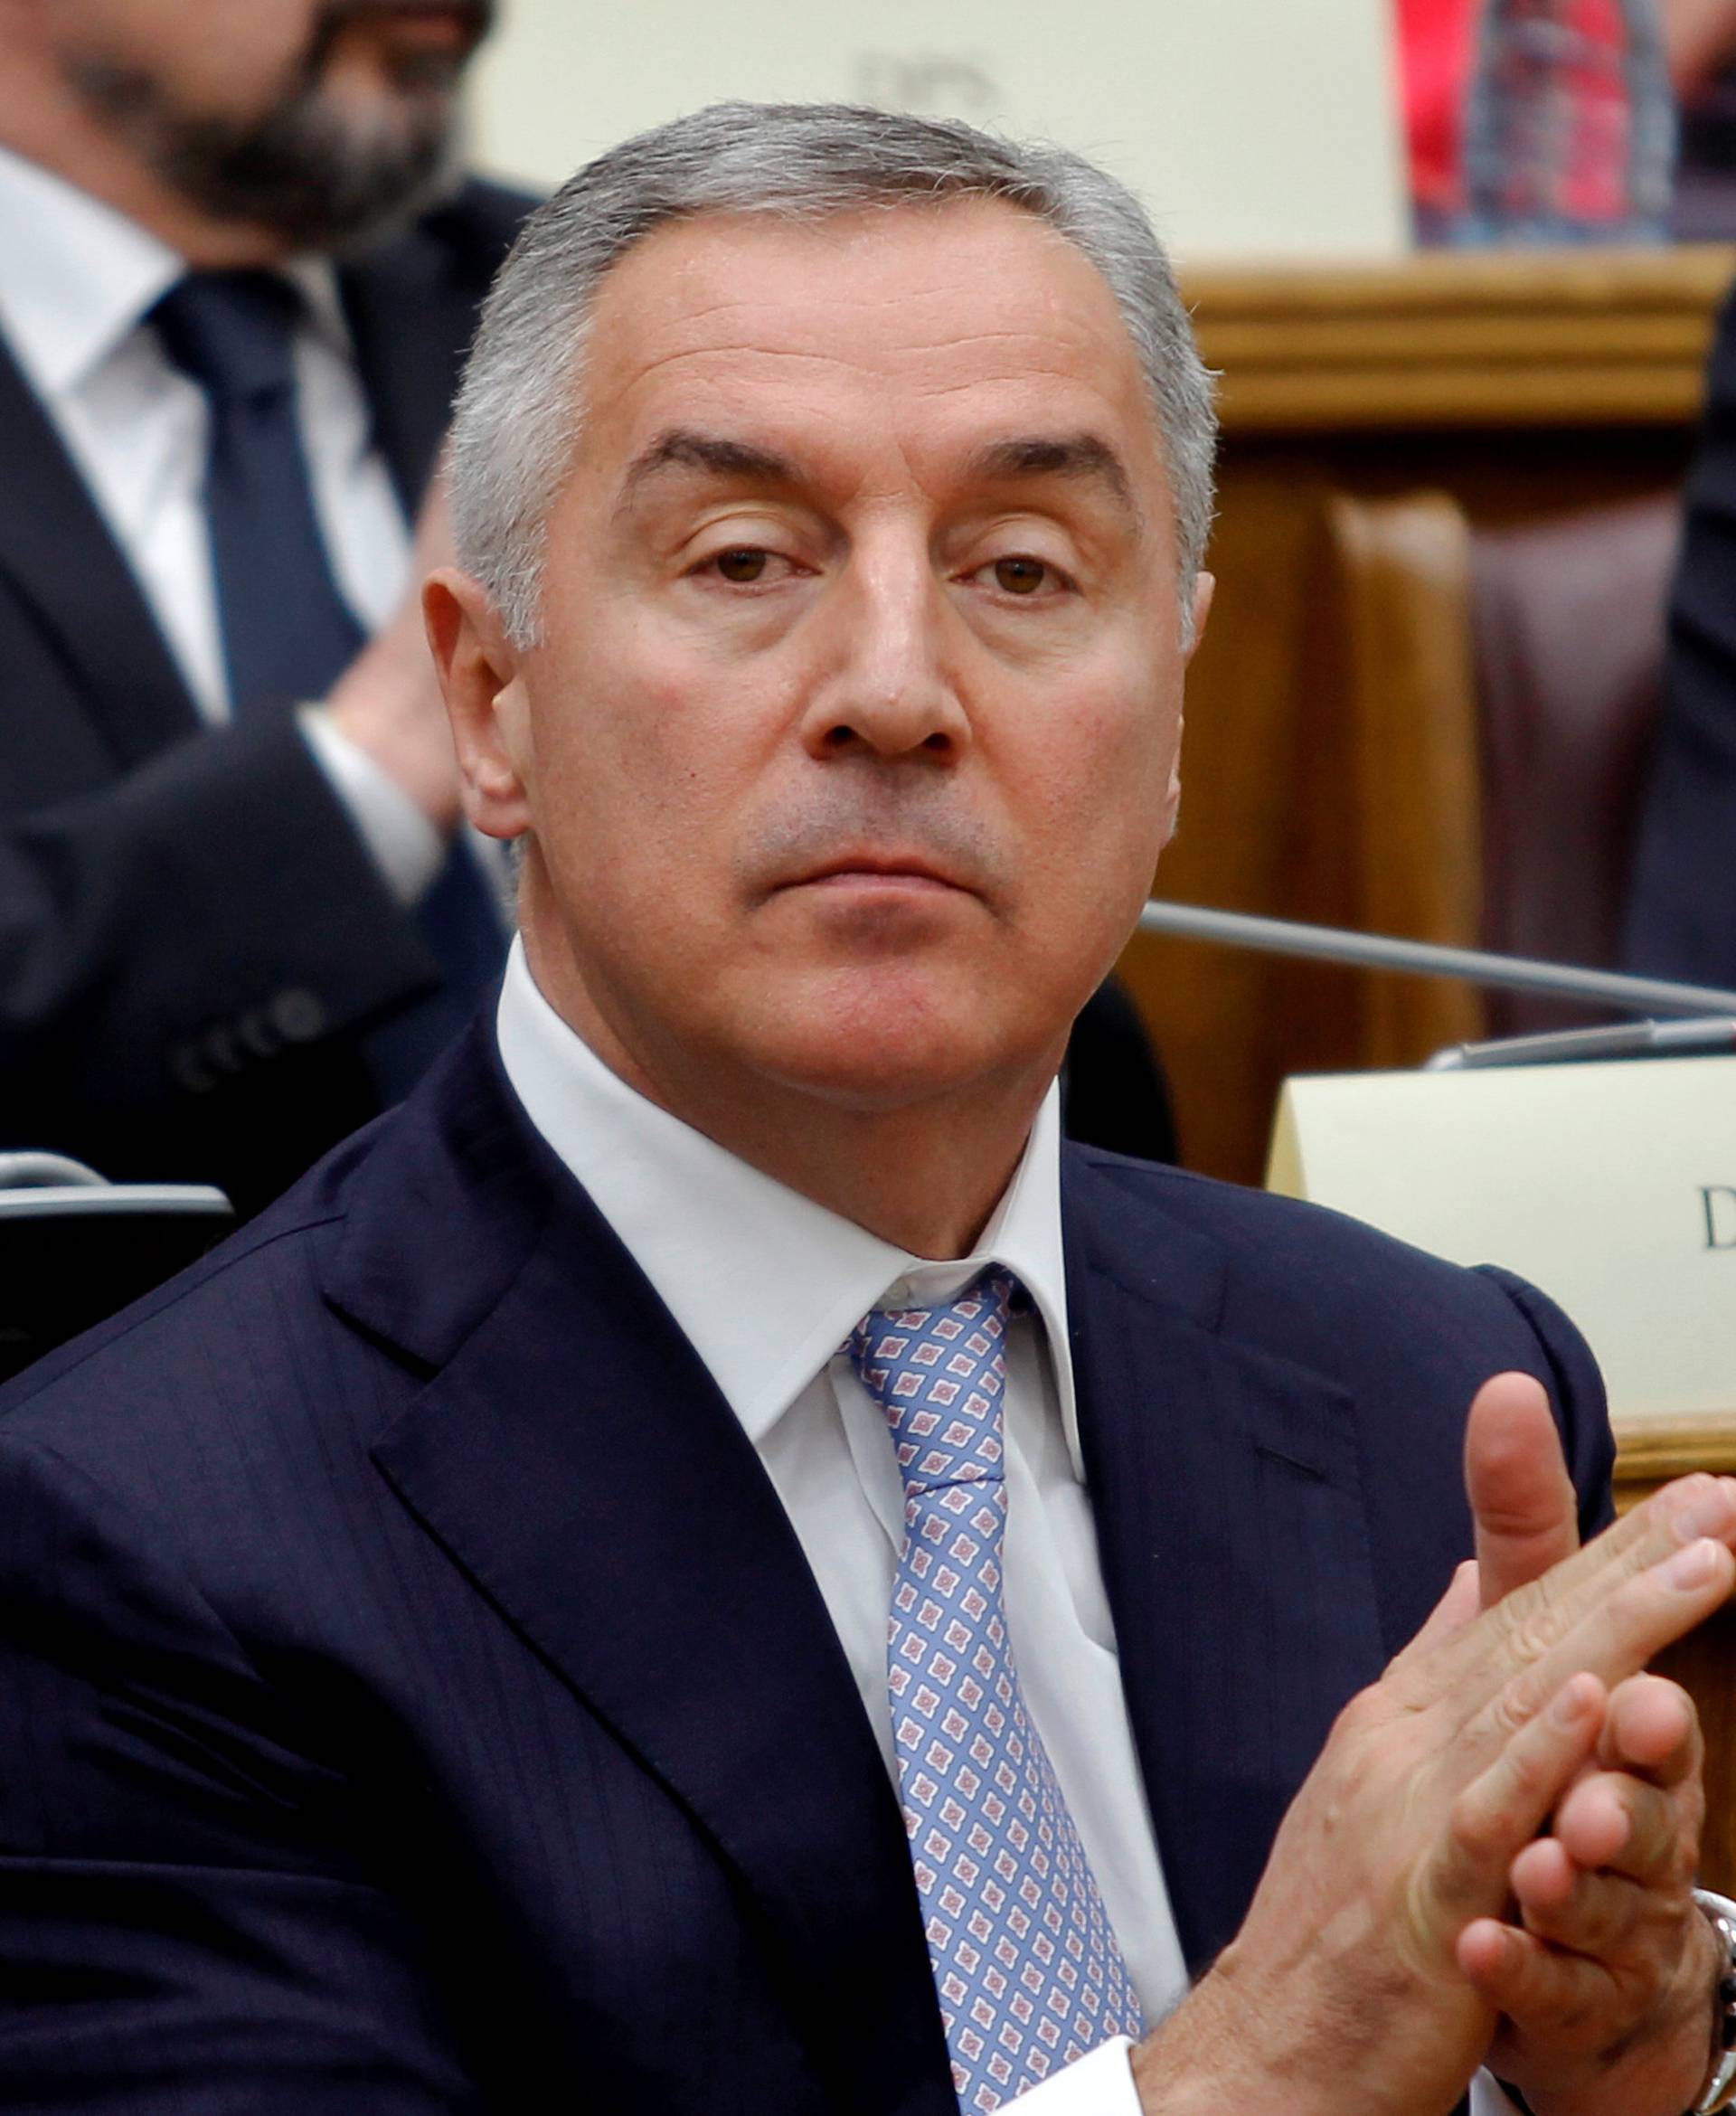 President of a ruling Democratic Party of Socialist (DPS), former prime minister and president of Montenegro, Milo Djukanovic applauds during a parliament discussion on NATO membership agreement in Cetinje